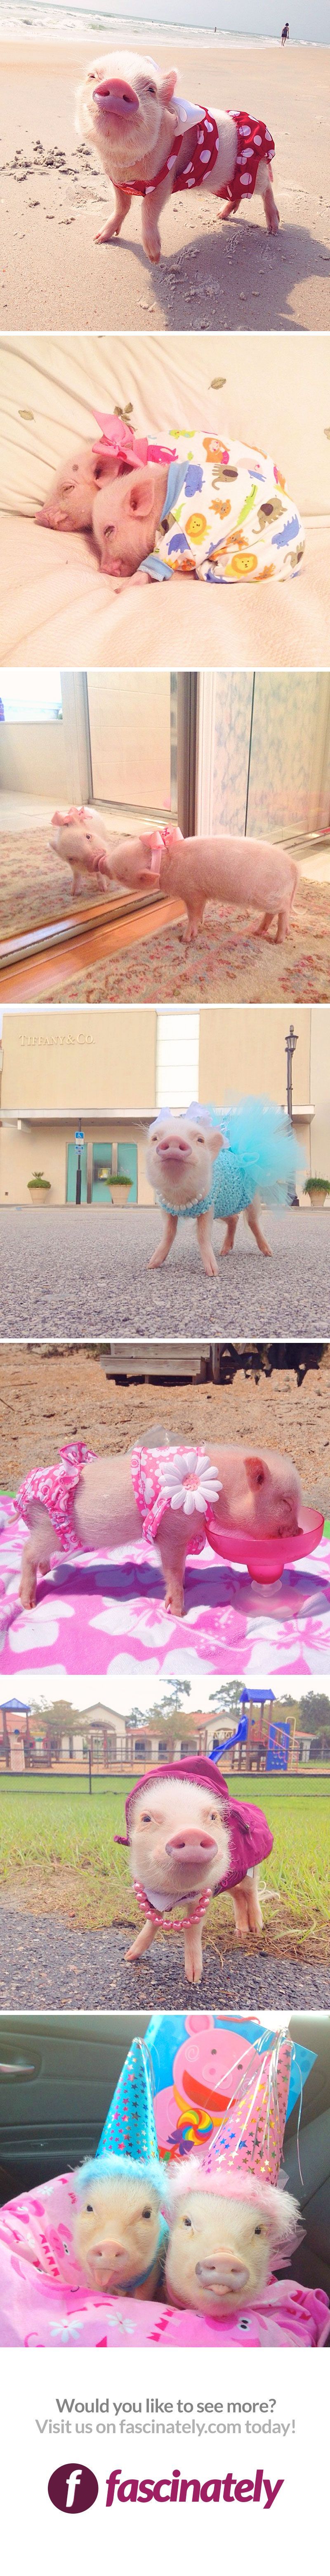 Meet the most adorable, popular pig on instagram! Shes pretty stylish, too – she loves to lay out